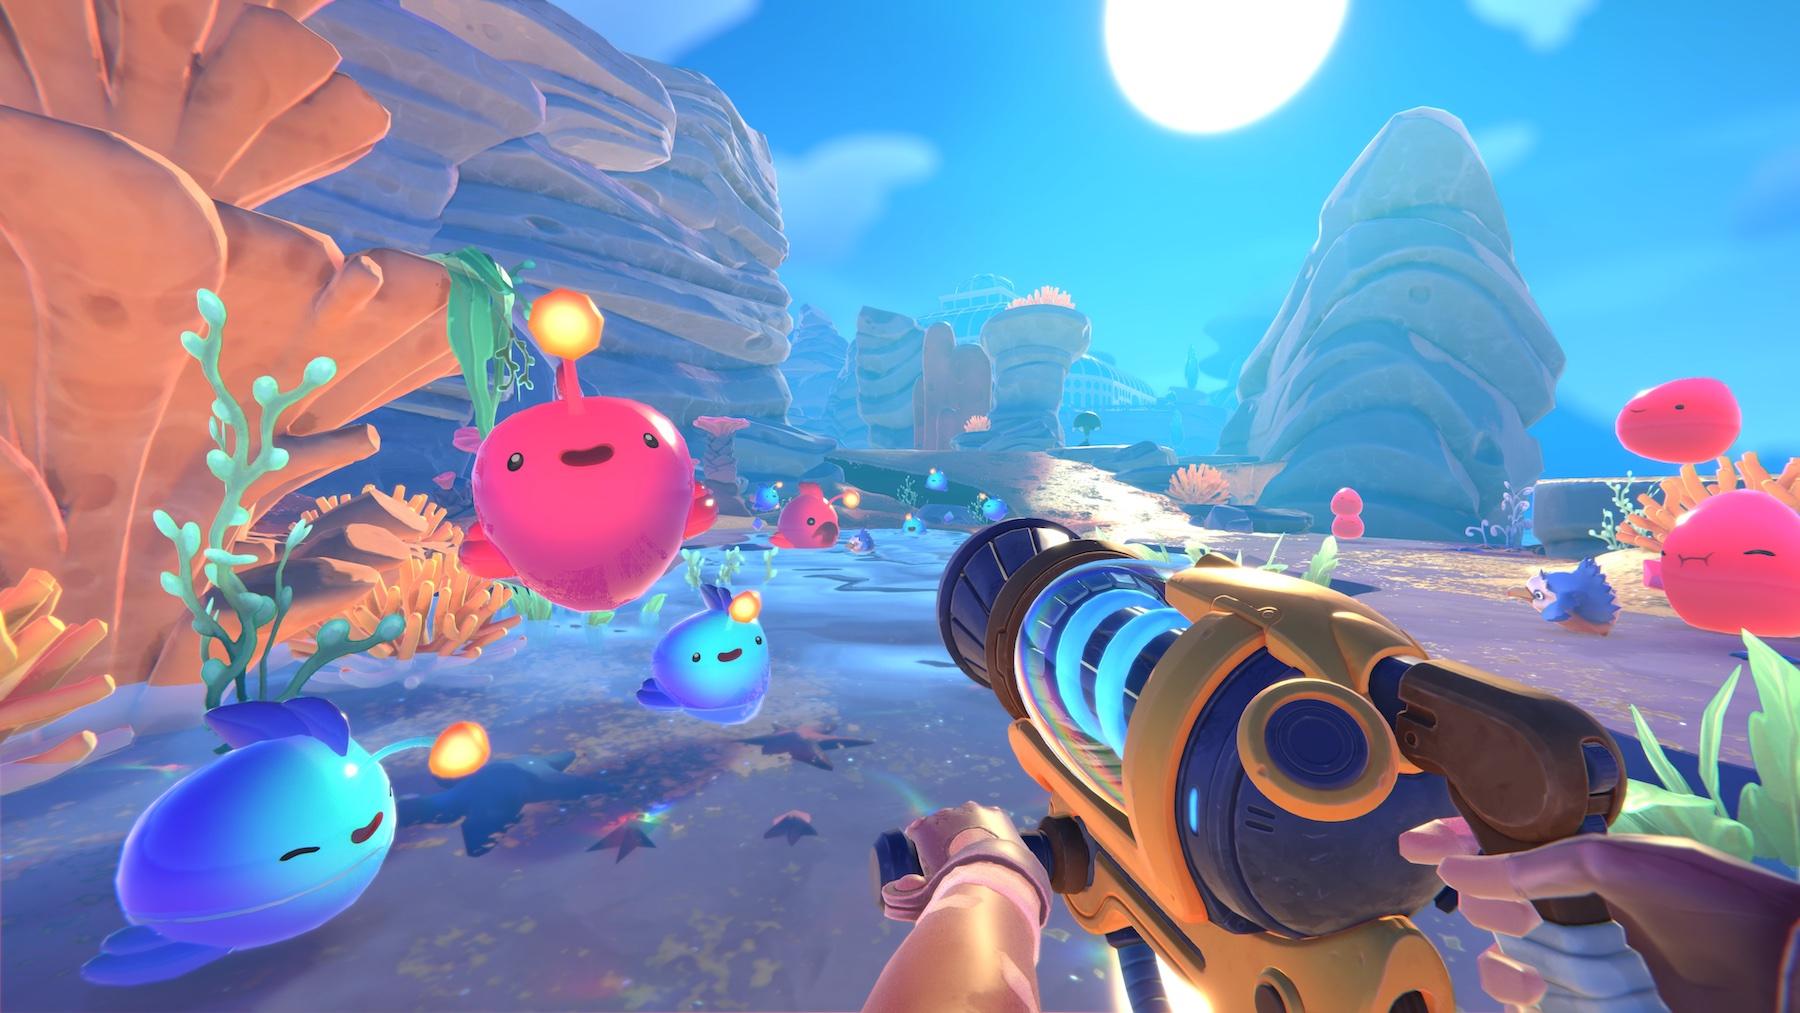 Is there a way to make slime rancher multiplayer - weeklybinger